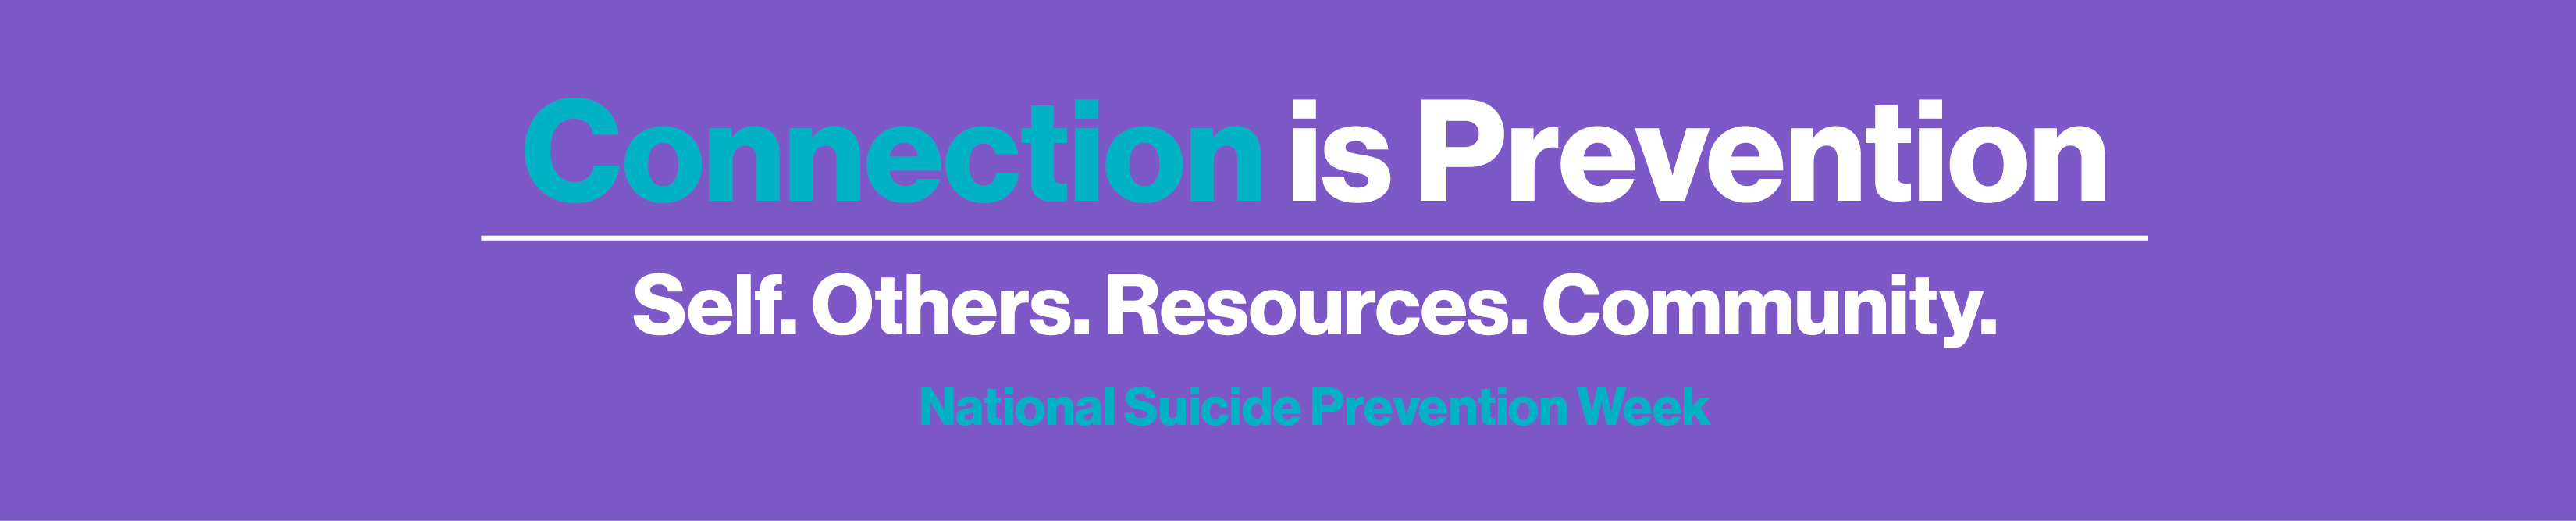 Connection is Prevention: National Suicide Prevention Week Self Others Resources Community